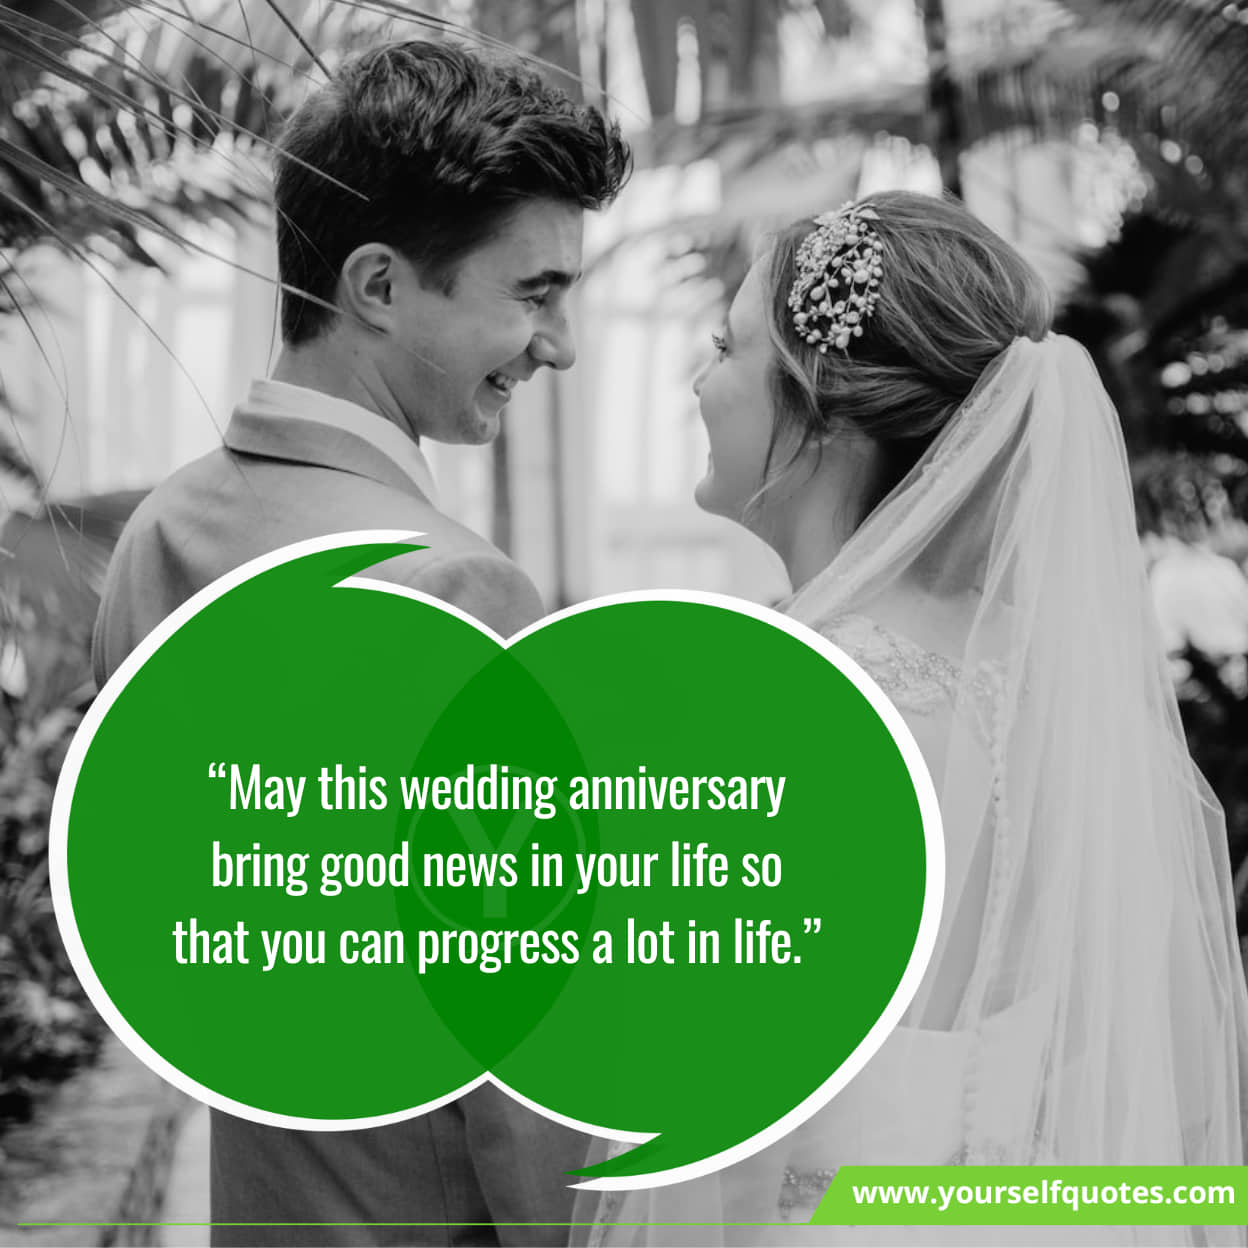 Inspiring Wedding Anniversary Wishes for Brother